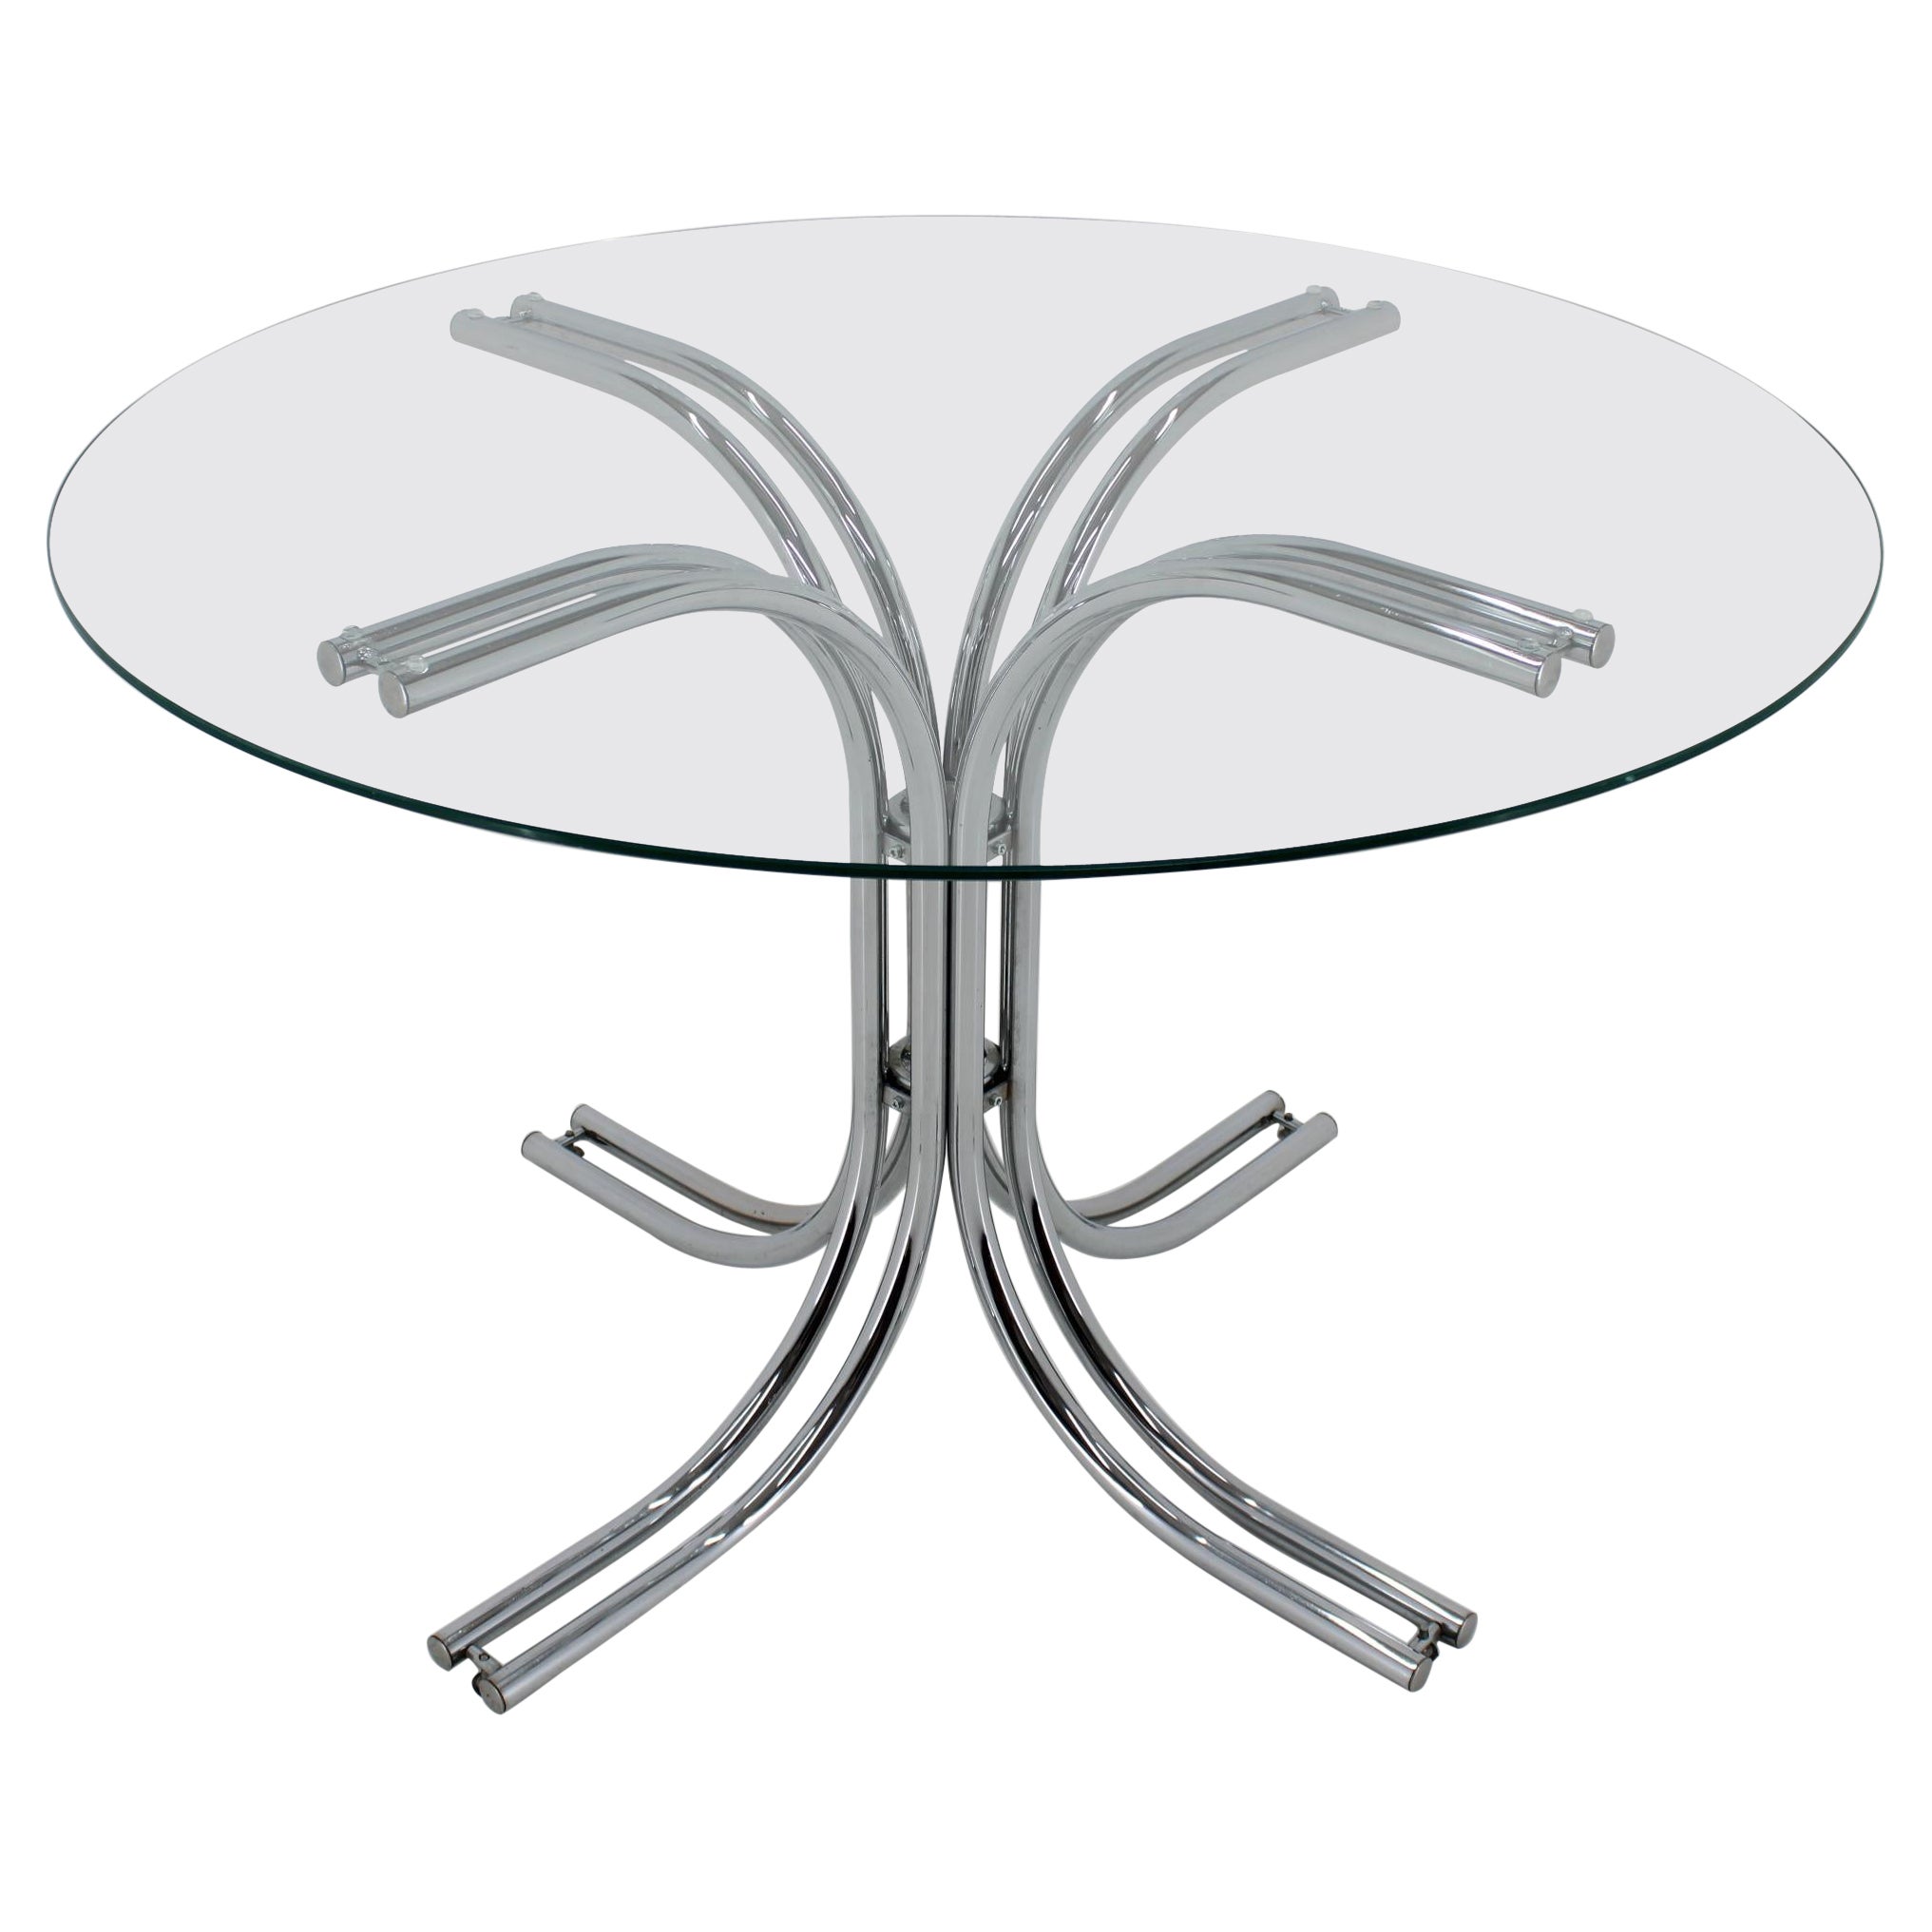 1980s Italian Round Glass and Chrome Plated Dining Table  For Sale